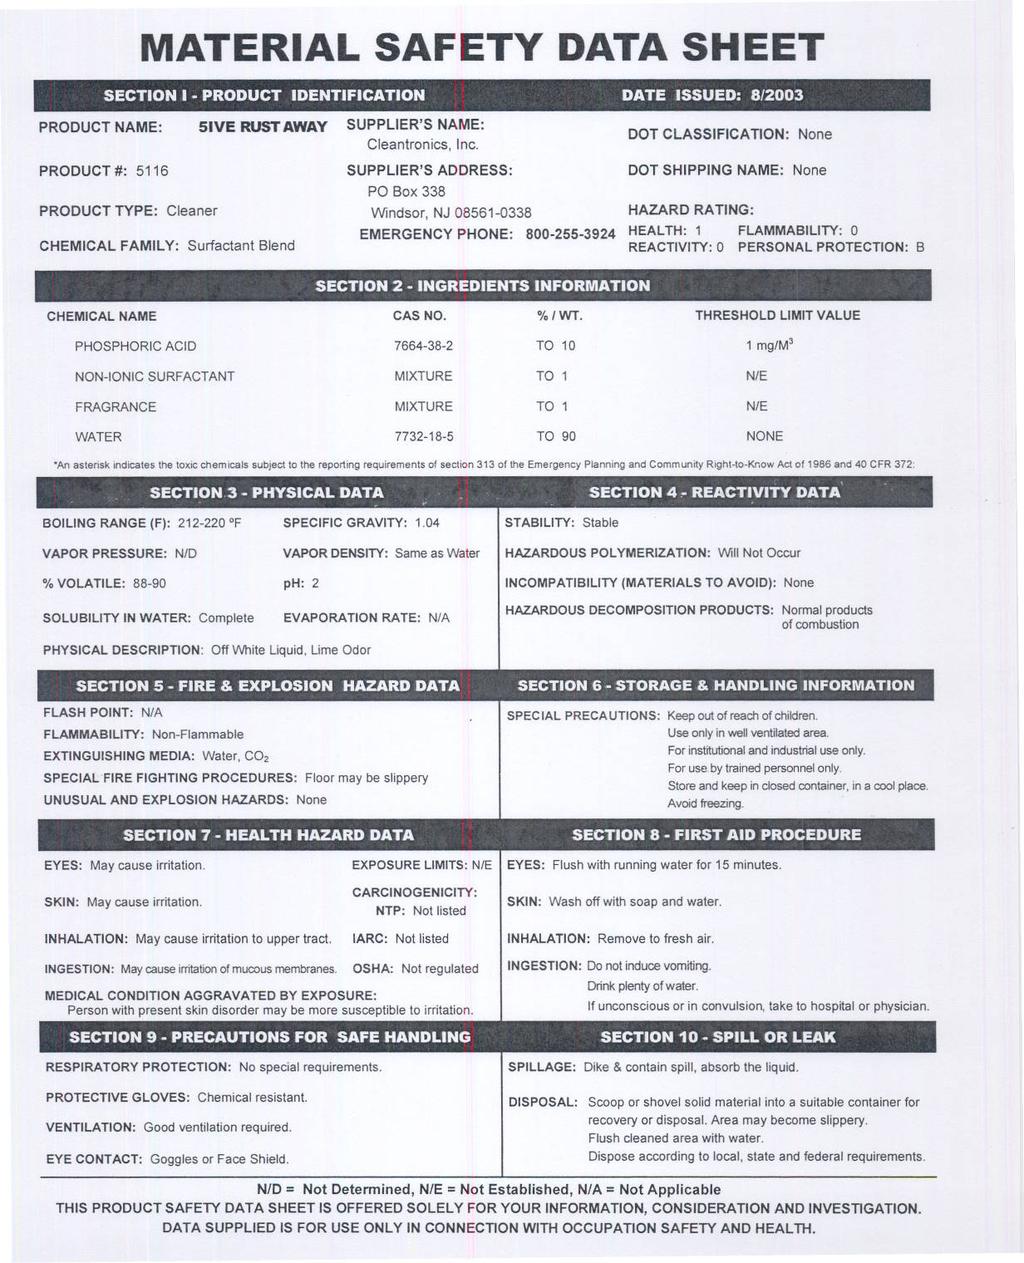 MATERAL SAFETY DATA SHEET SECTON -PRODUCT DENTFCATON DATE SSUED: 8/2003 PRODUCT NAME: SVE RUST AWAY PRODUCT #: 5116 PRODUCT TYPE: Cleaner CHEMCAL FAMLY: Surfactant Blend SUPPLER'S NAME: Cleantronics,